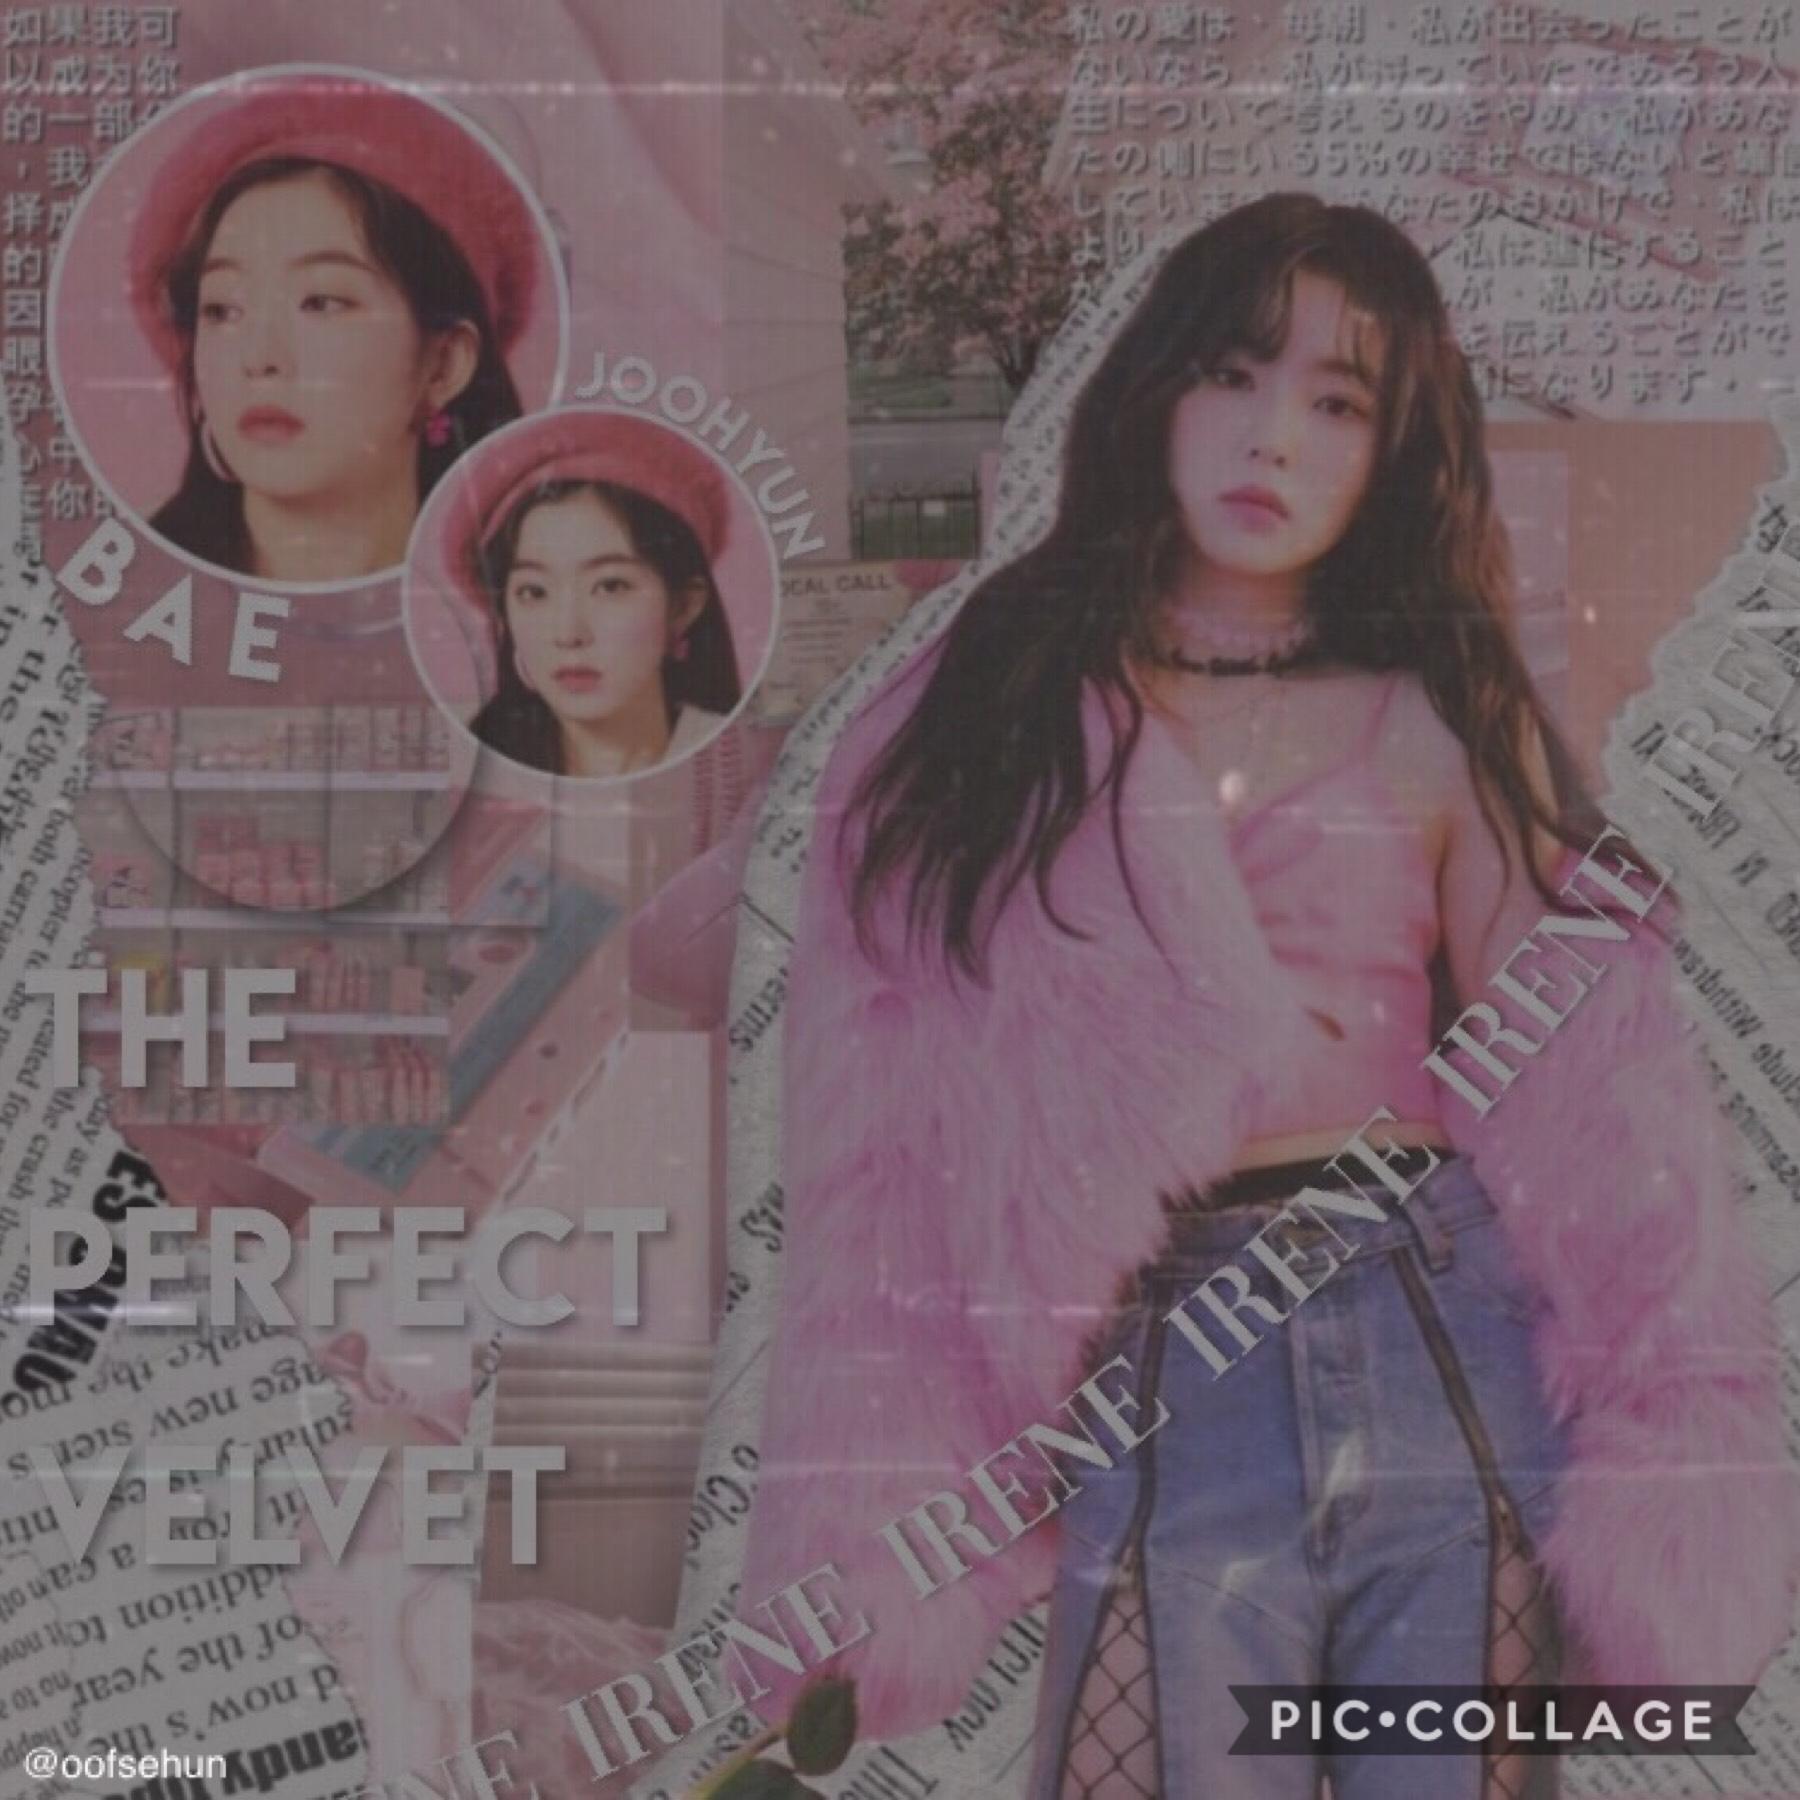 💫 ｉｒｅｎｅ (tap)

for everyone that commented on my previous post:
thank you ❤️ omg y’all are so kind so sweet and supportive ilyasm i don’t deserve you 🥺❤️
i’m ok now~ (kind of)

anyways here’s another trashy edit

have an amazing day/night uwu